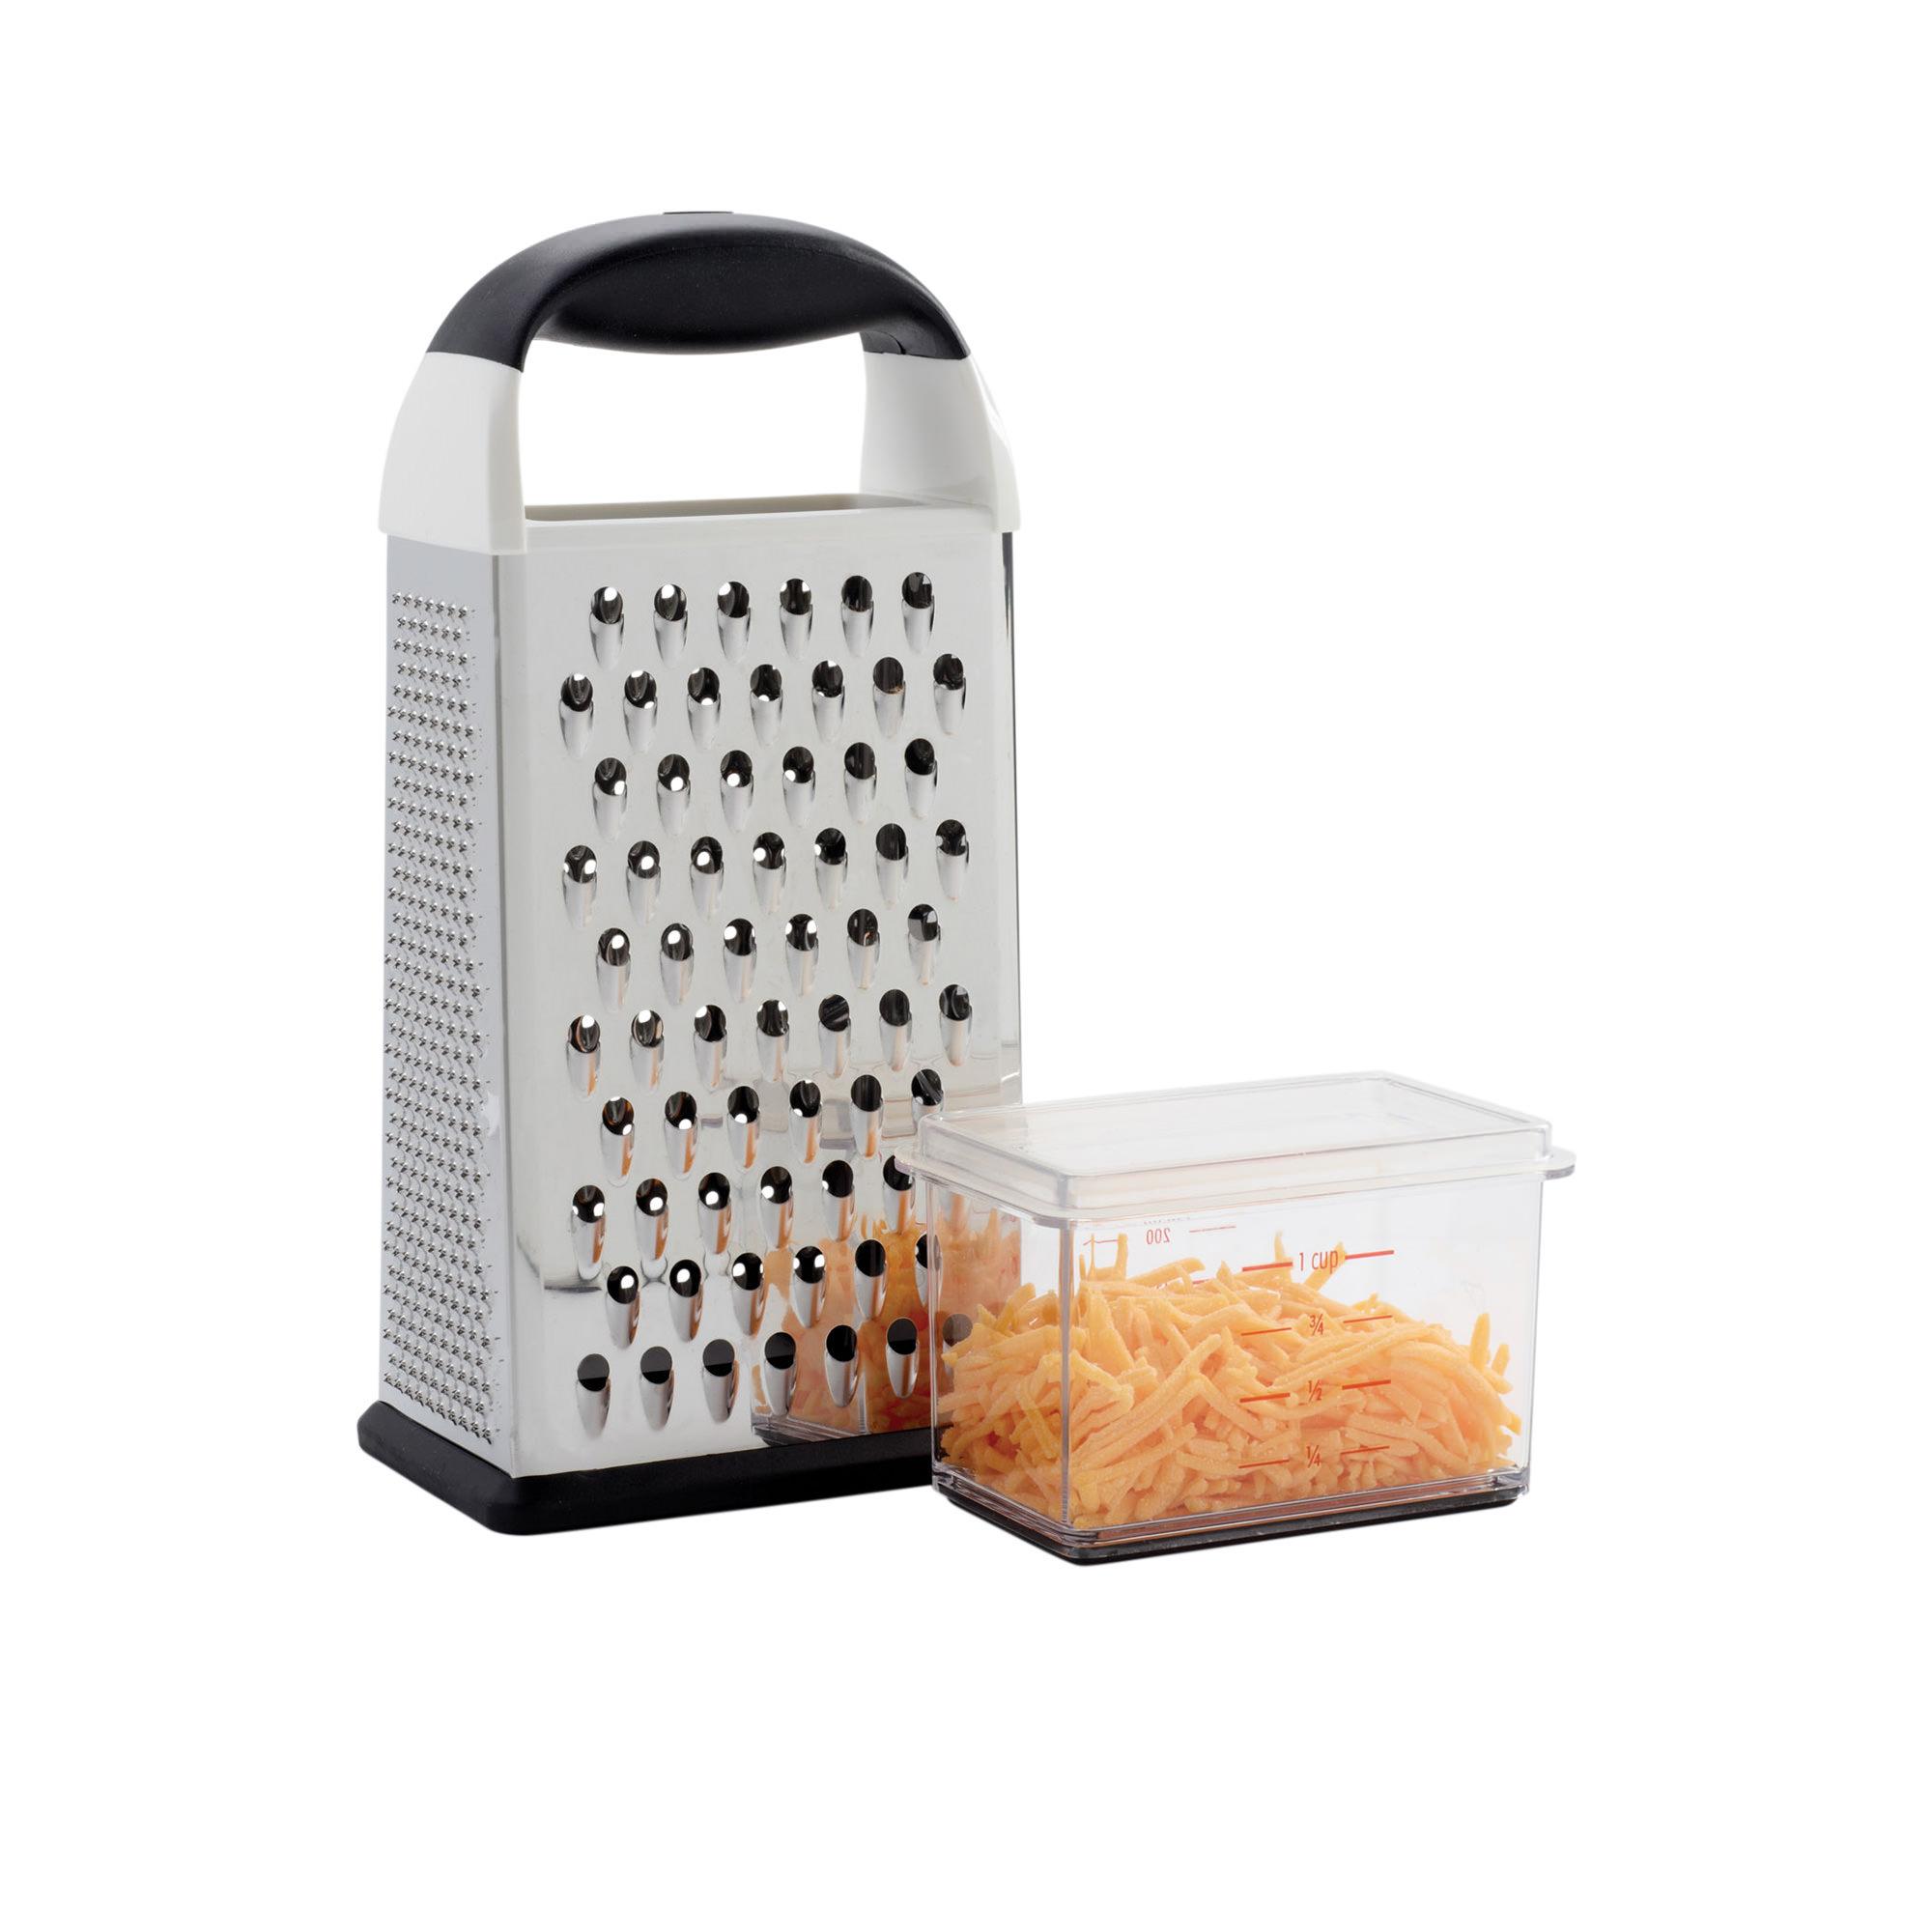 OXO Good Grips Box Grater Image 5